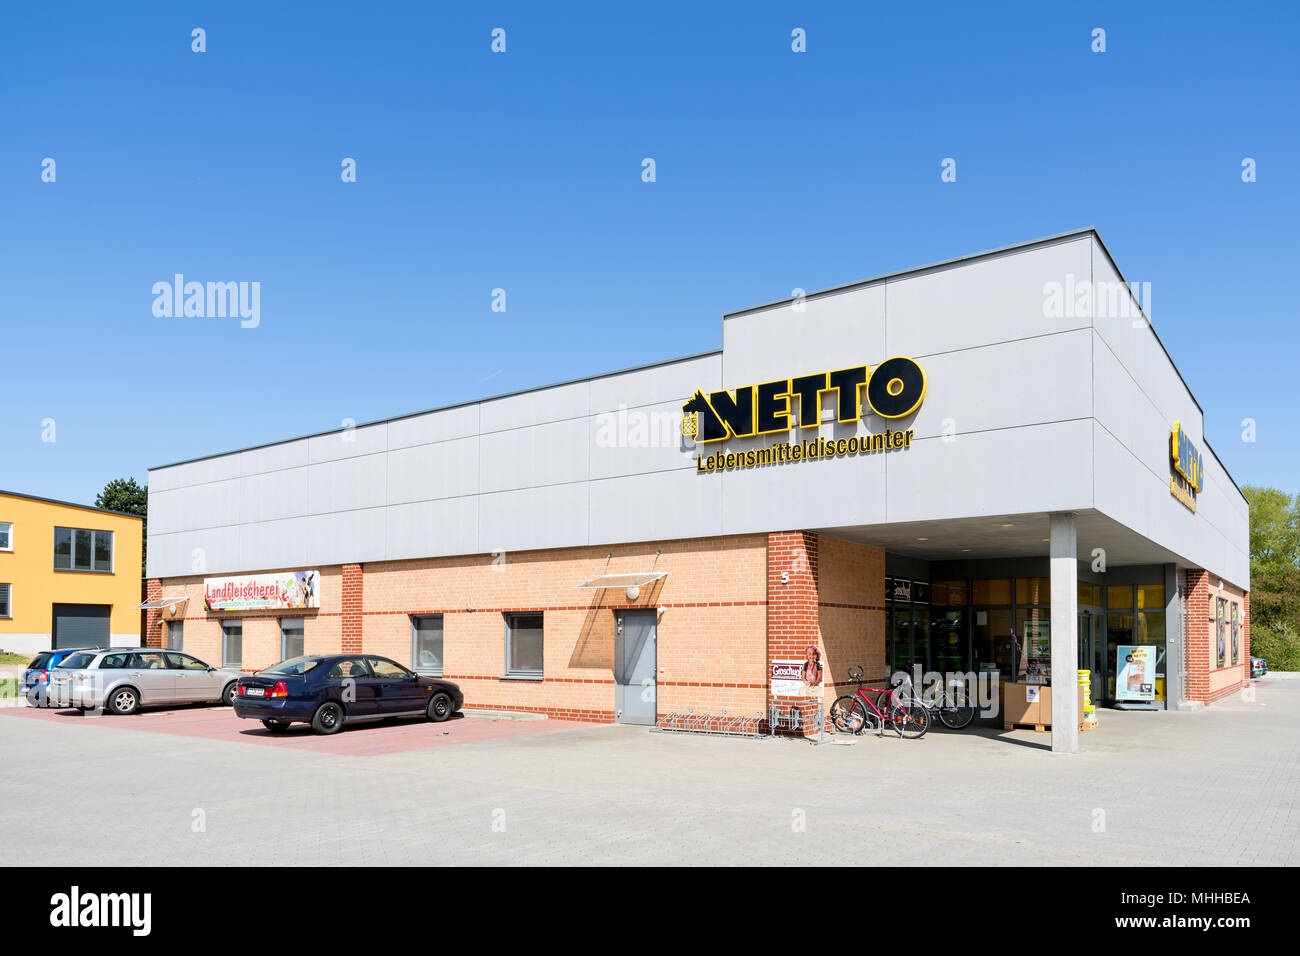 Netto Lebensmitteldiscounter branch in Limbach-Oberfrohna, D. Netto is a Danish discount supermarket operating in Denmark, Germany, Poland and Sweden. Stock Photo